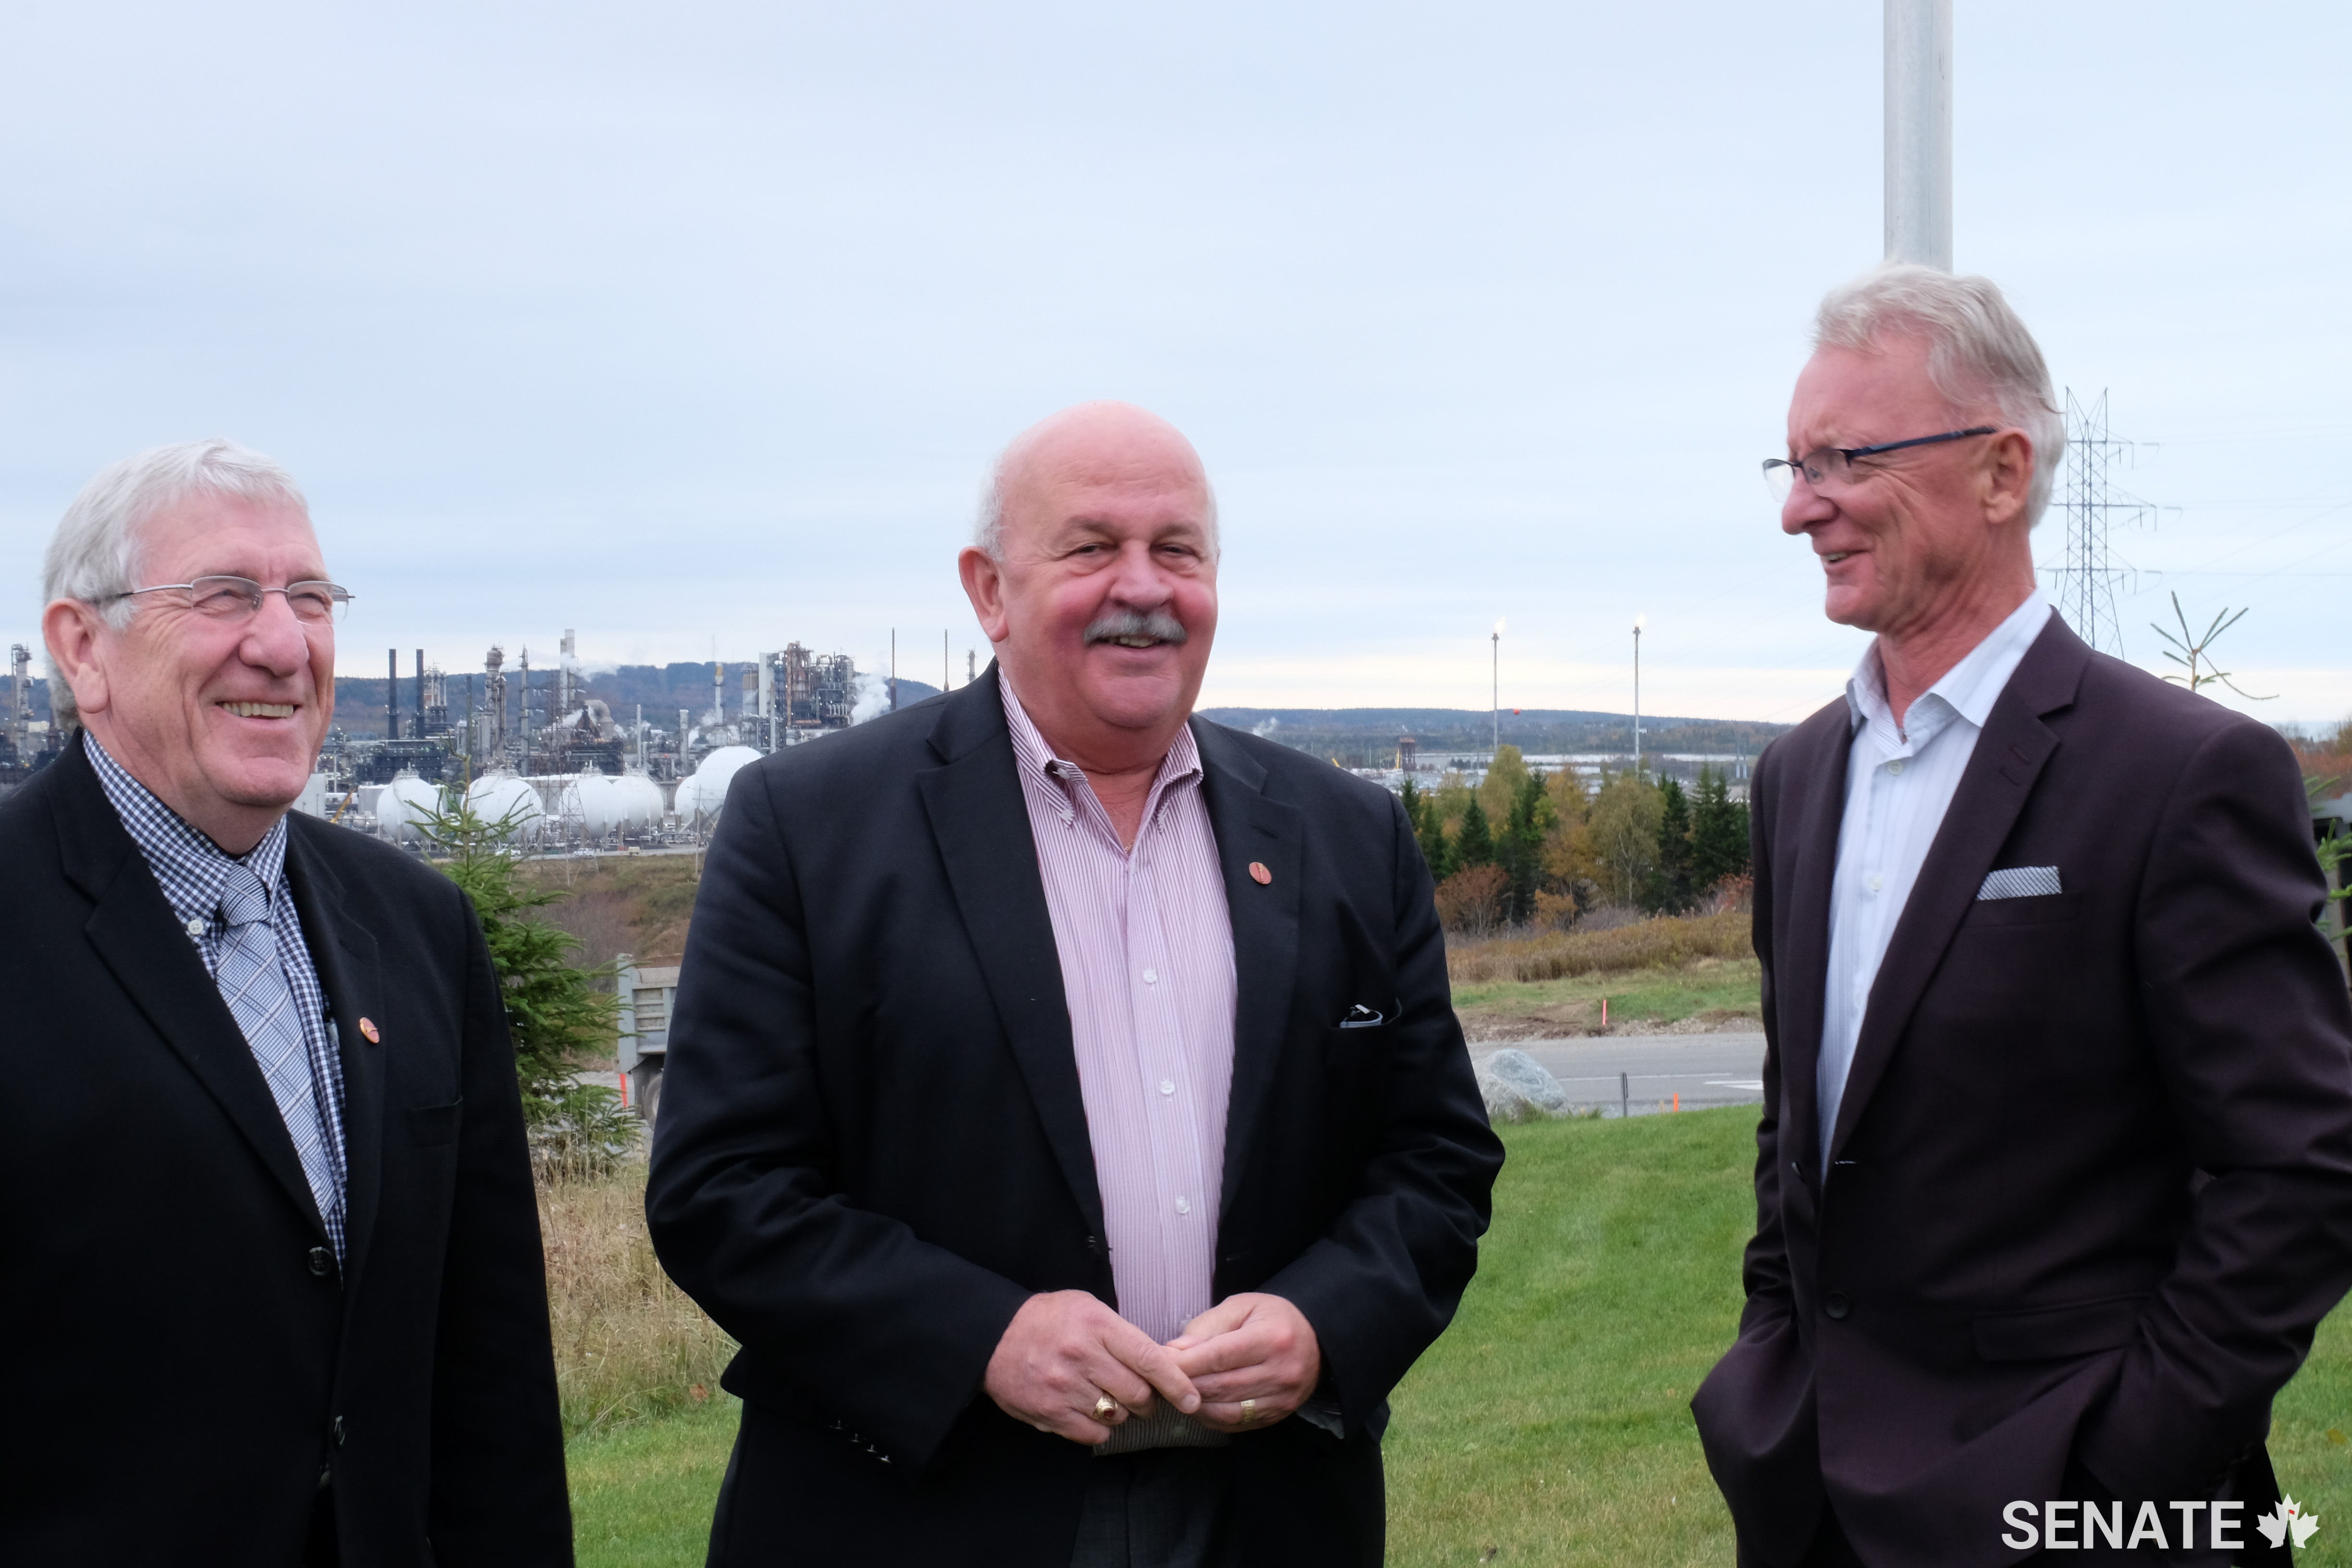 Left to right: Senators Doyle, Mercer and Boisvenu share a moment during a fact-finding mission on pipelines.